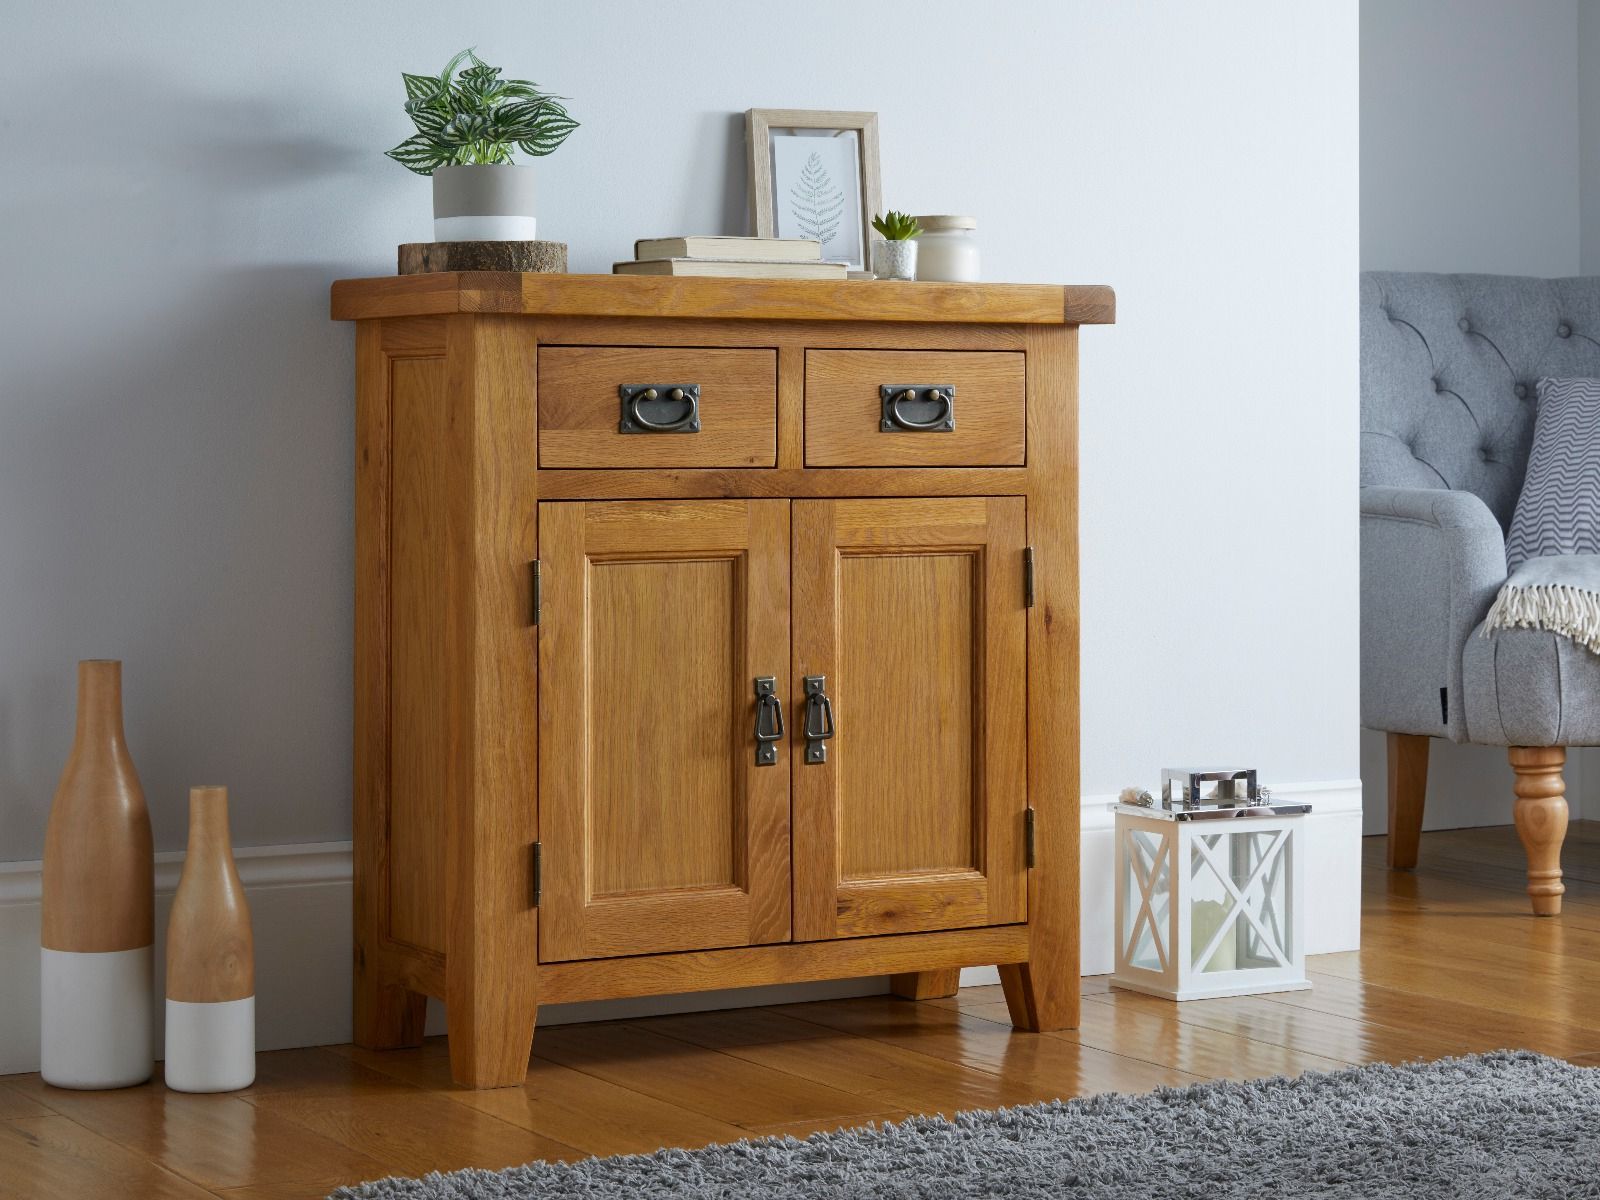 Top Furniture Intended For Rustic Oak Sideboards (View 10 of 10)